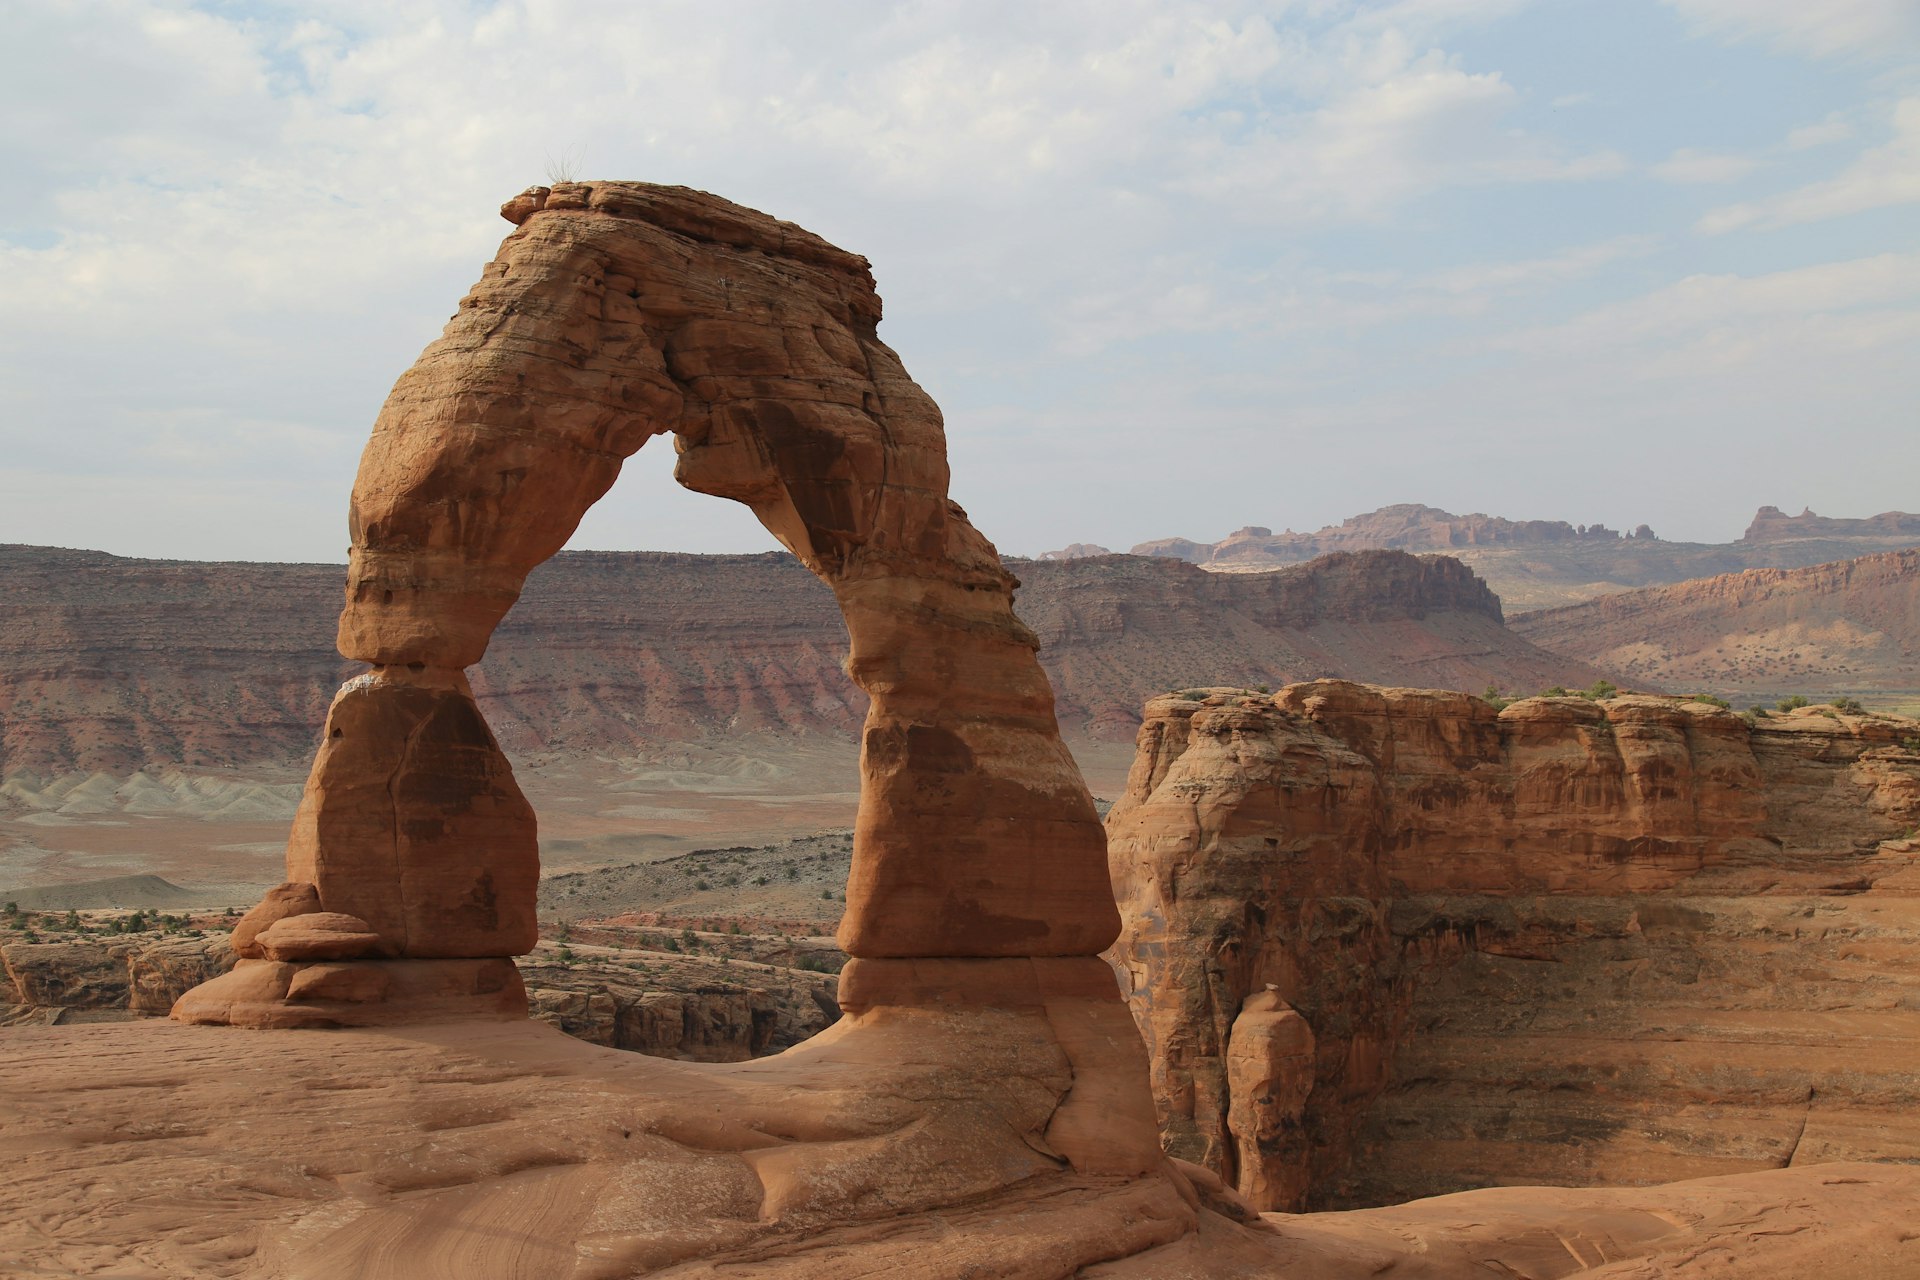 A sandstone arch with red rock cliffs in the background under a blue sky